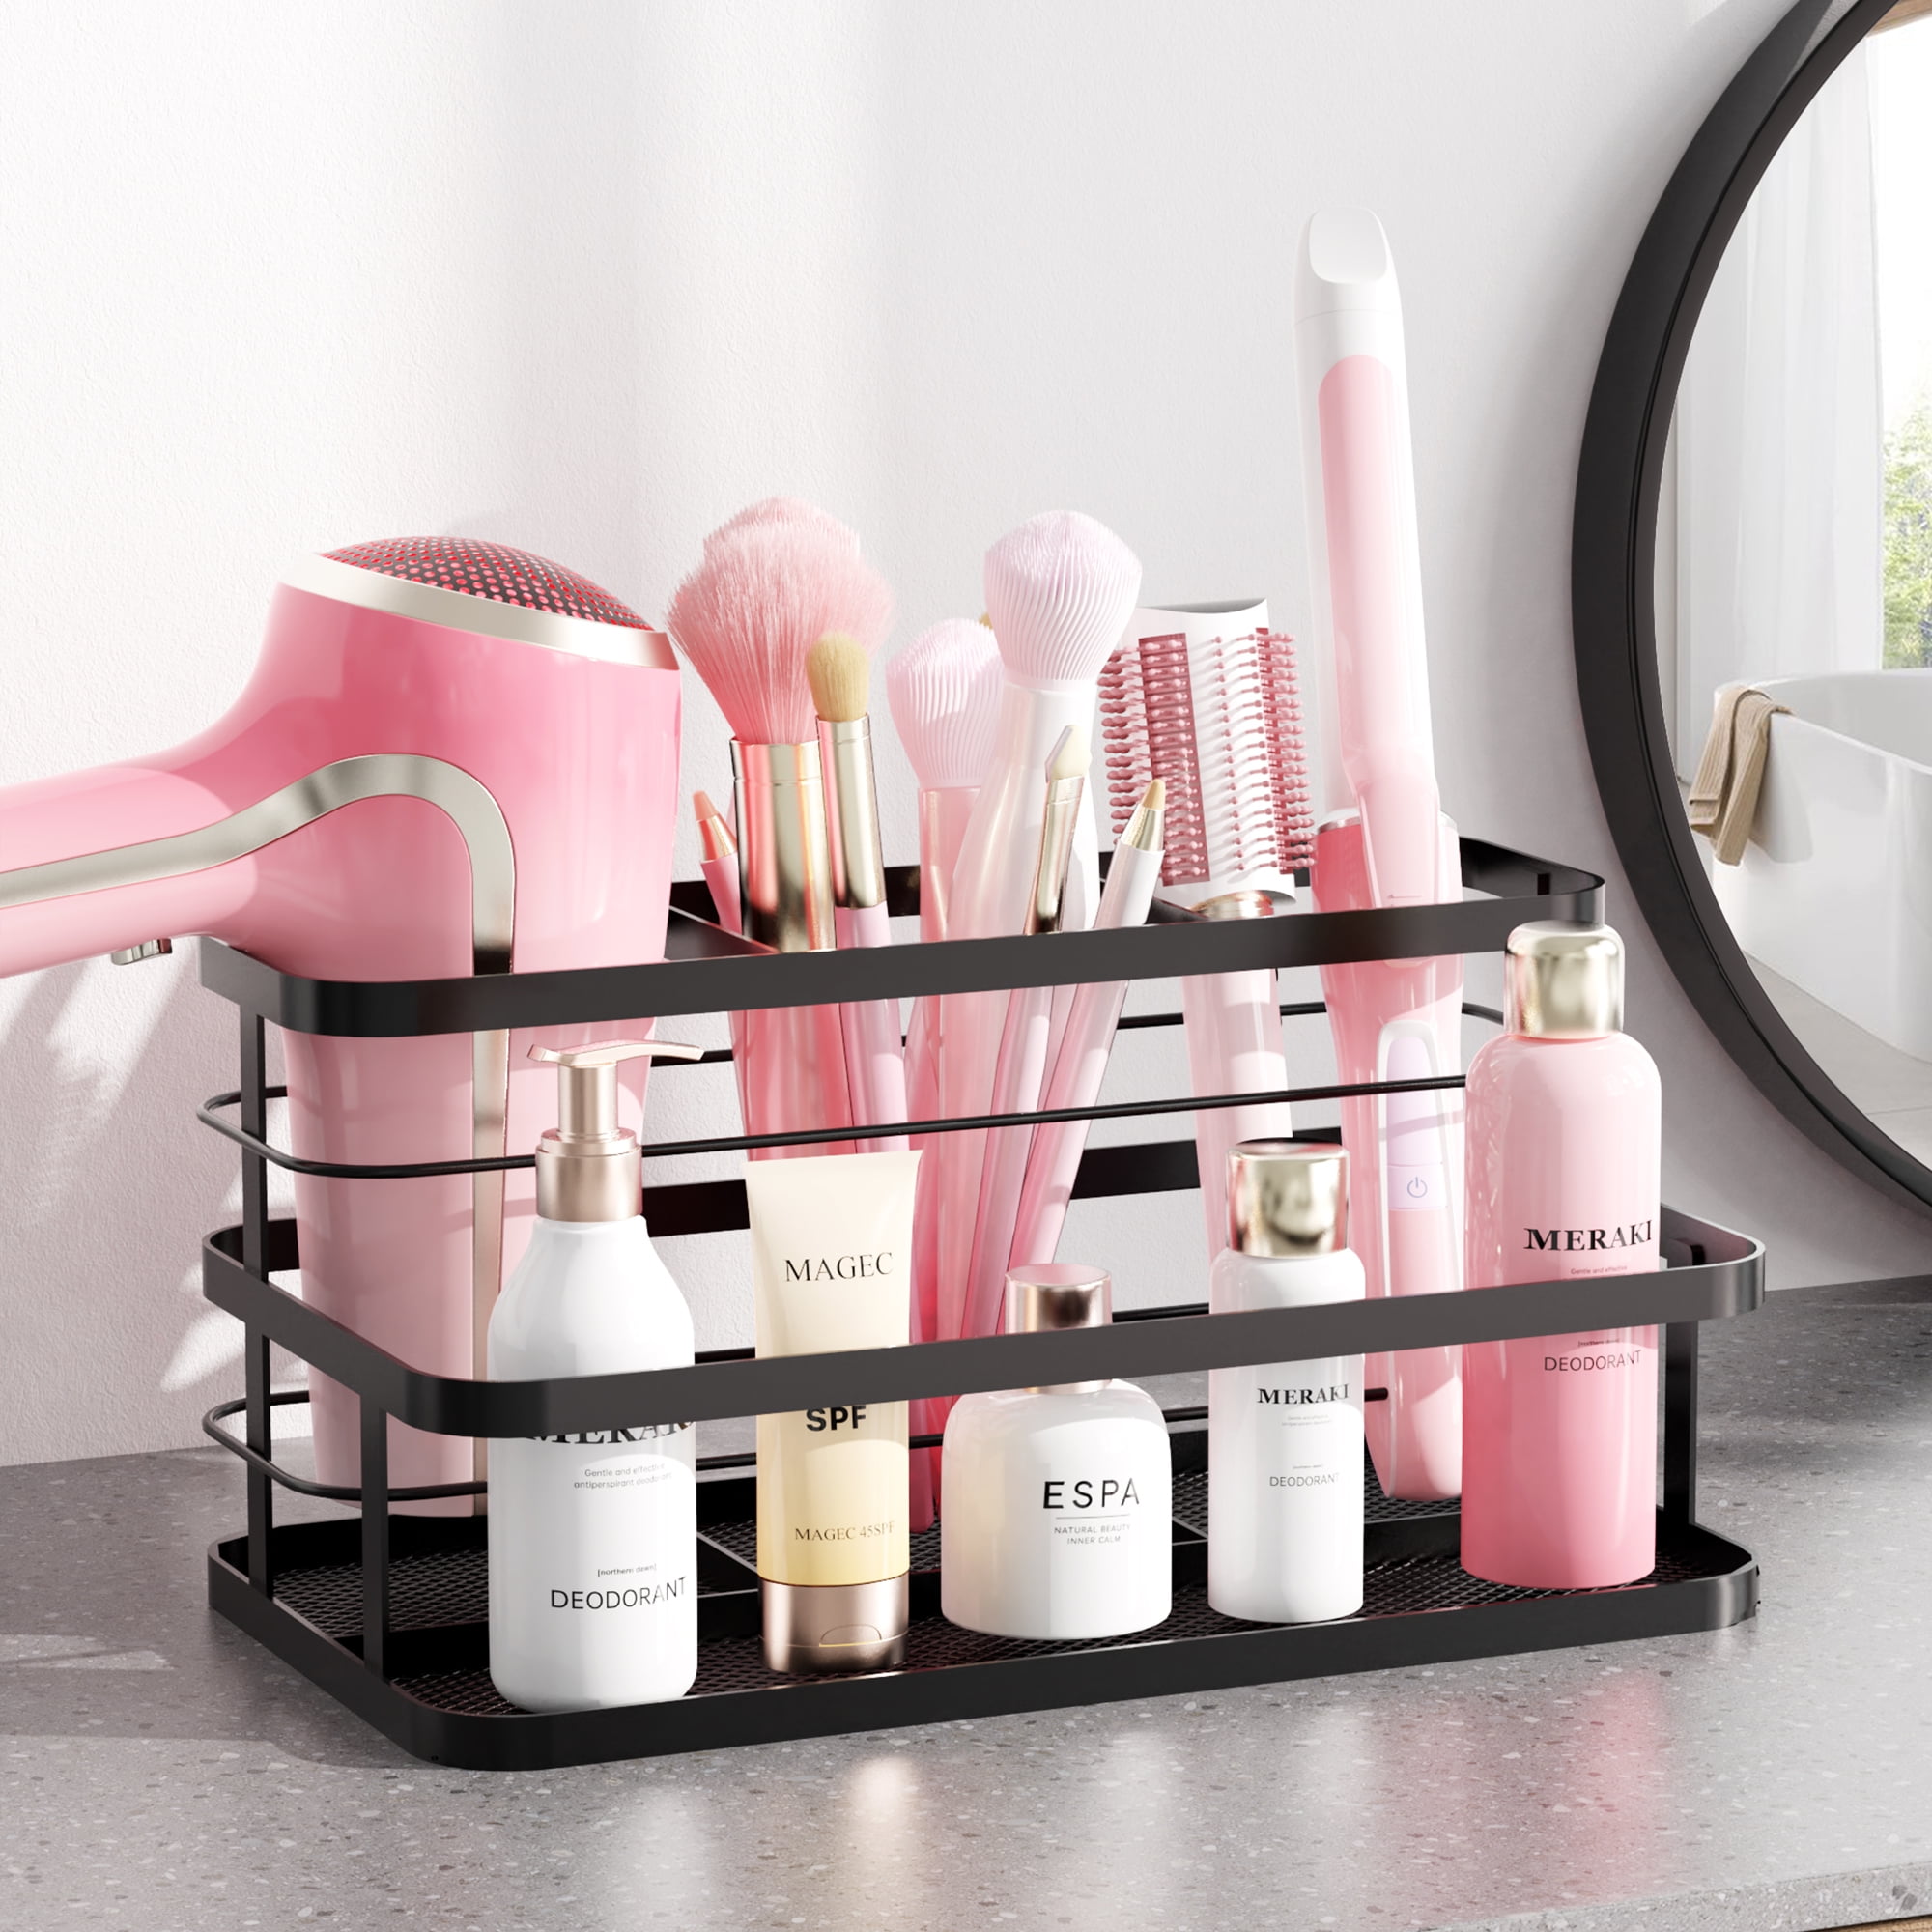 YIGII Hair Tool Organizer - Bathroom Counter Organizer Hair Dryer Holder,  Vanity Caddy with Removable Cup Storage for Hair Dryer Accessories, Makeup